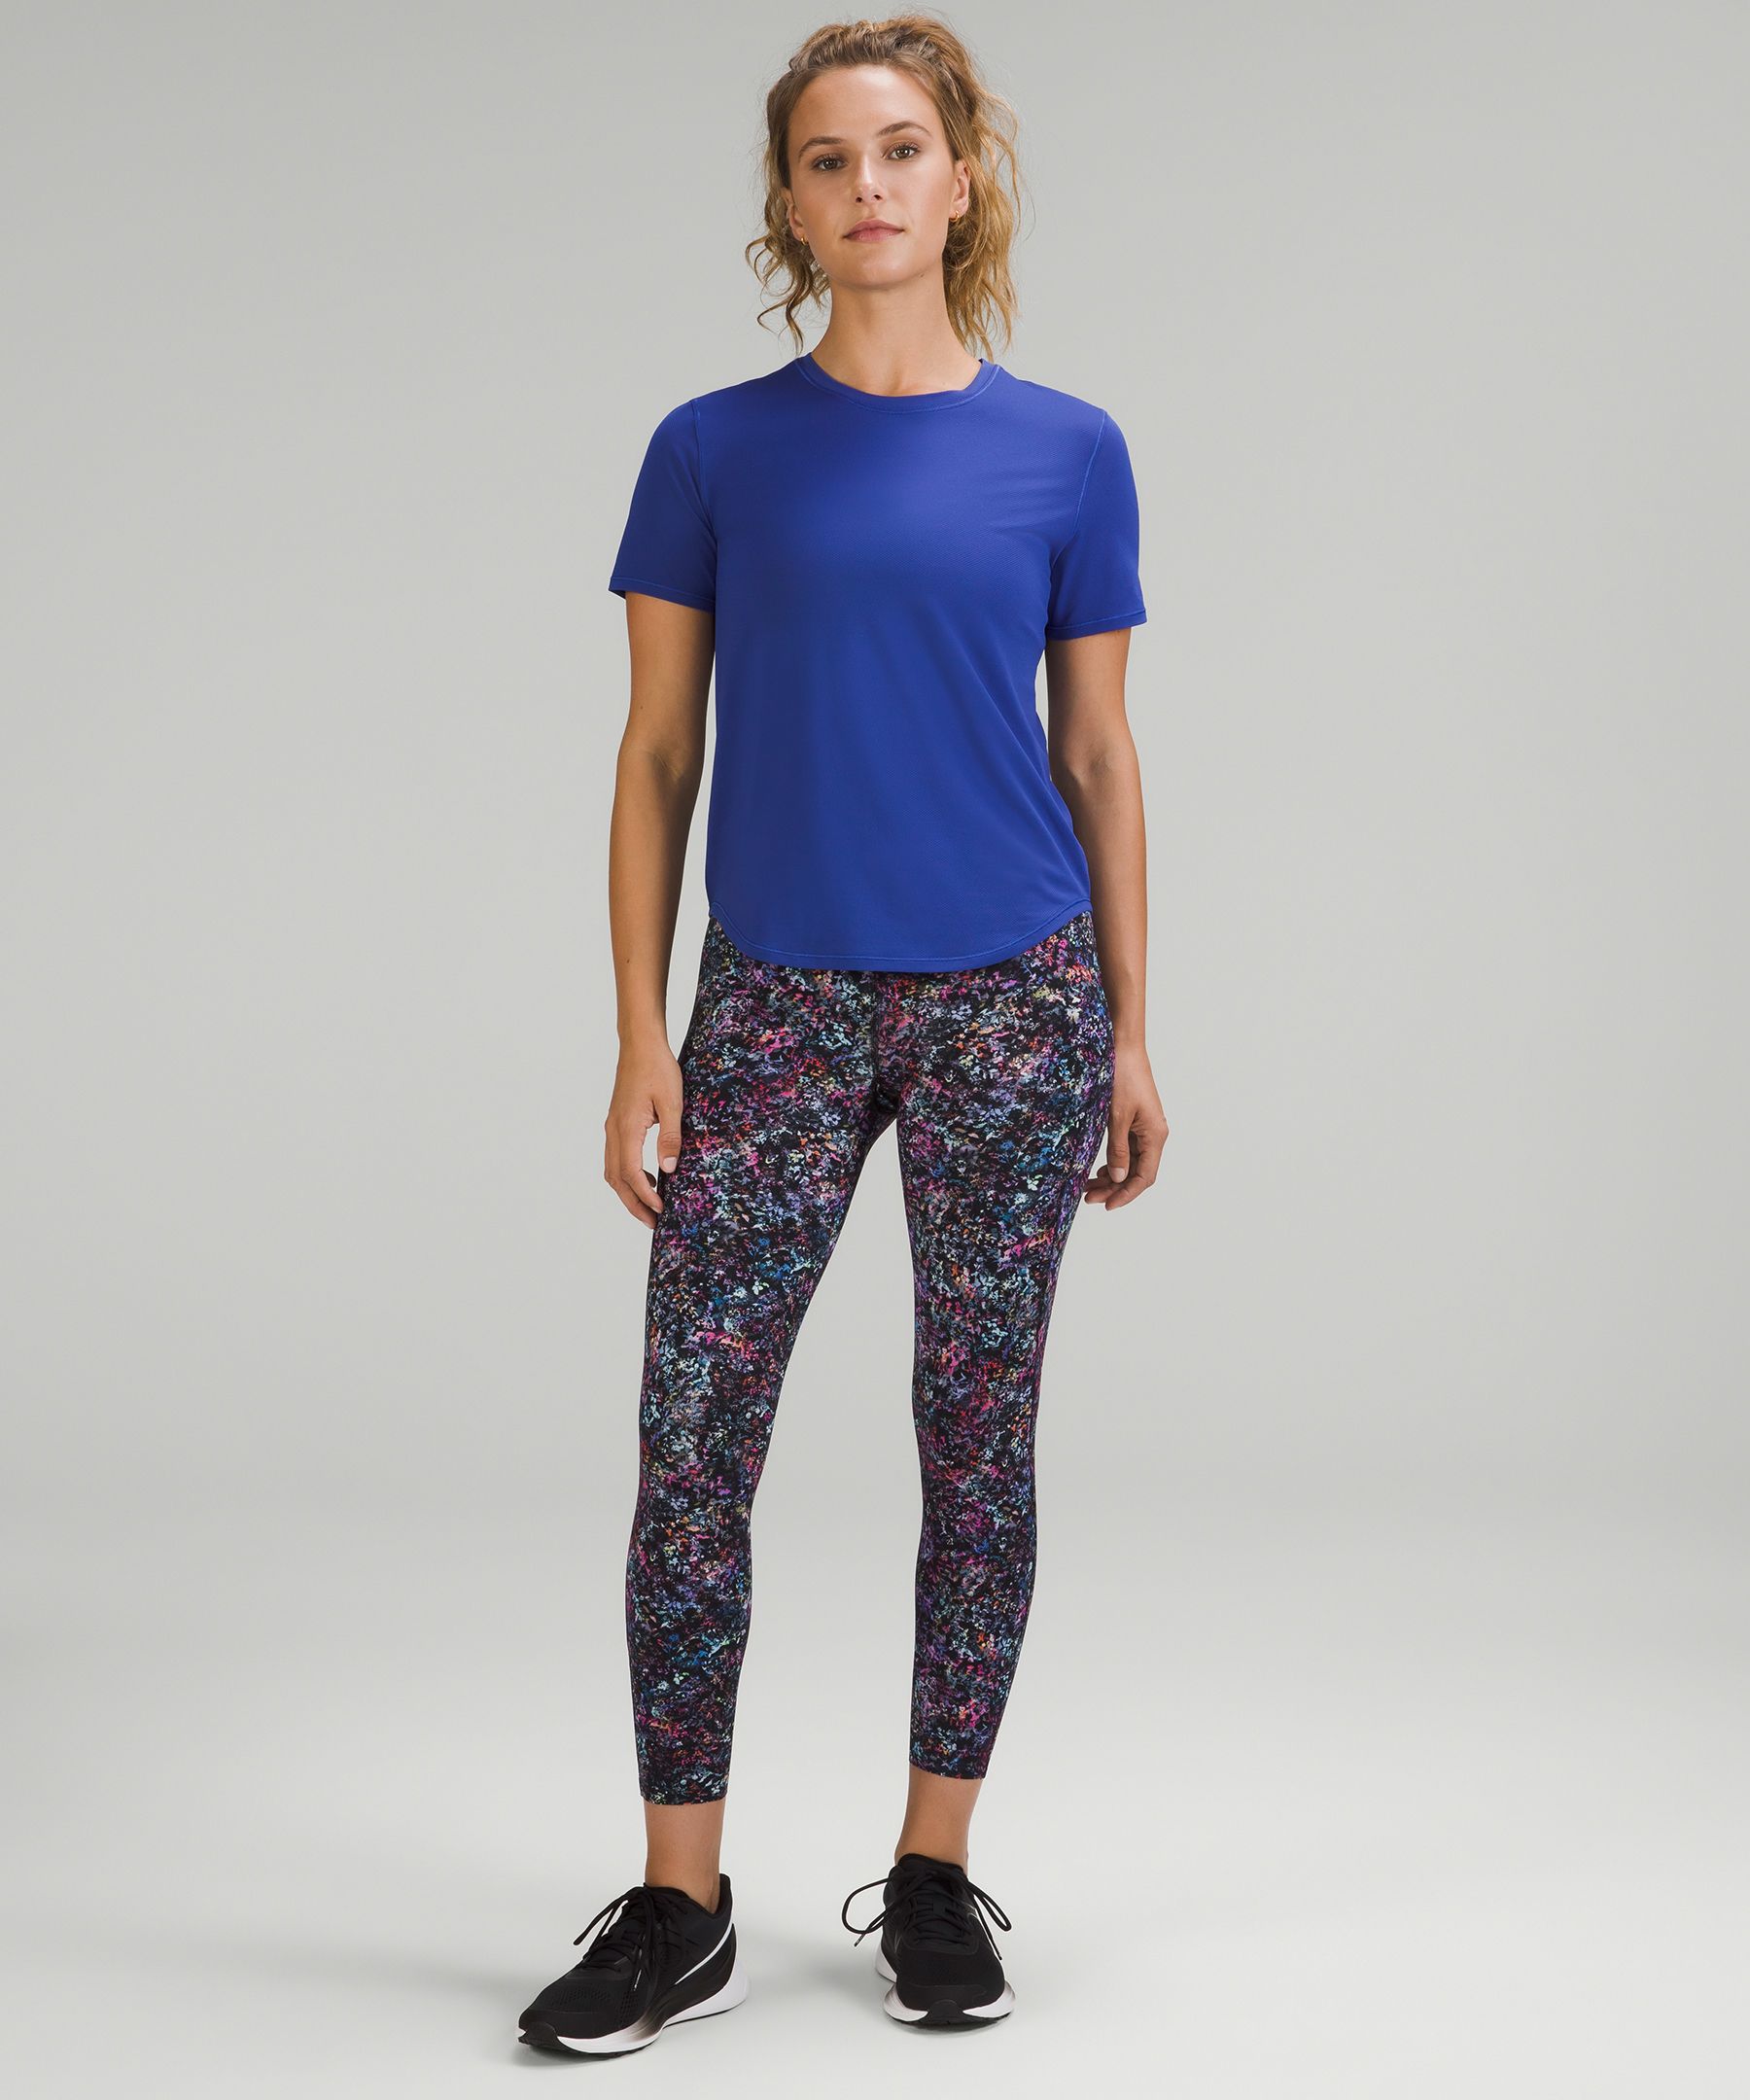 Lululemon Review: Our Favorite Leggings, Sports Bras, and More